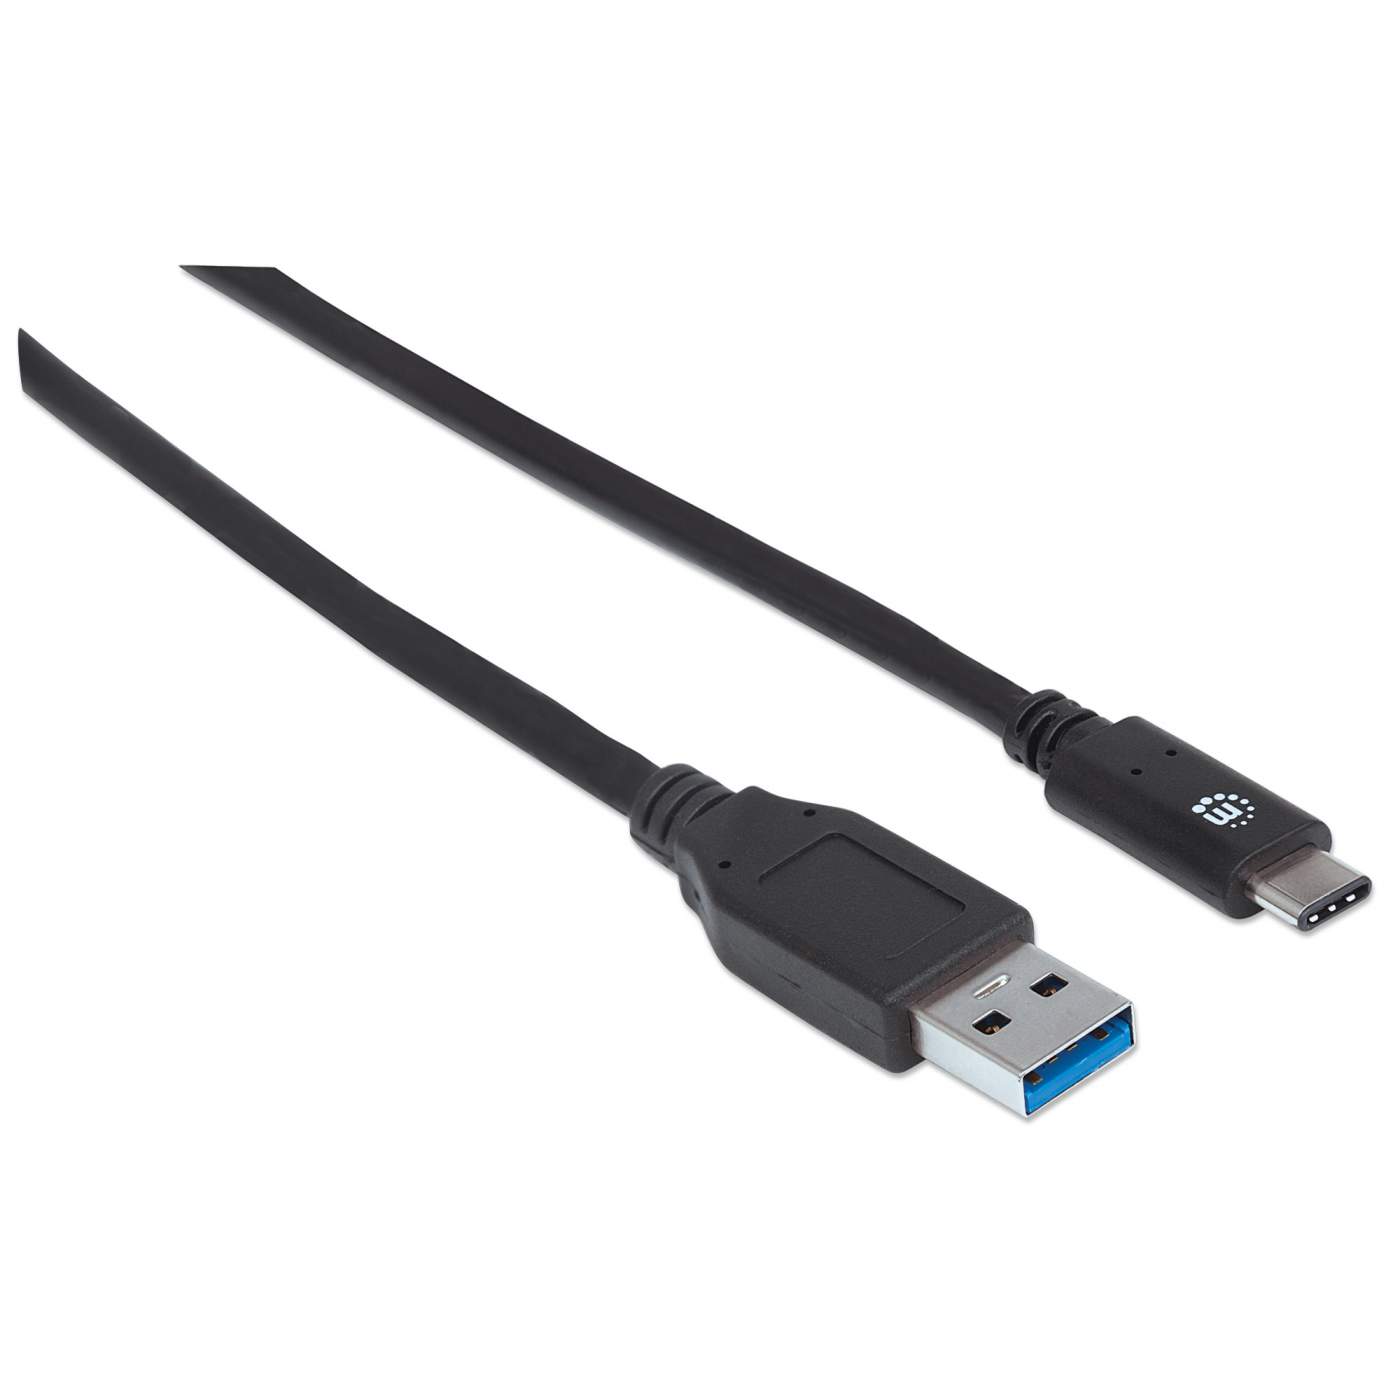 Manhattan 353373 USB-C Male 3.0 to USB-A Male 2.0 Cable 3ft